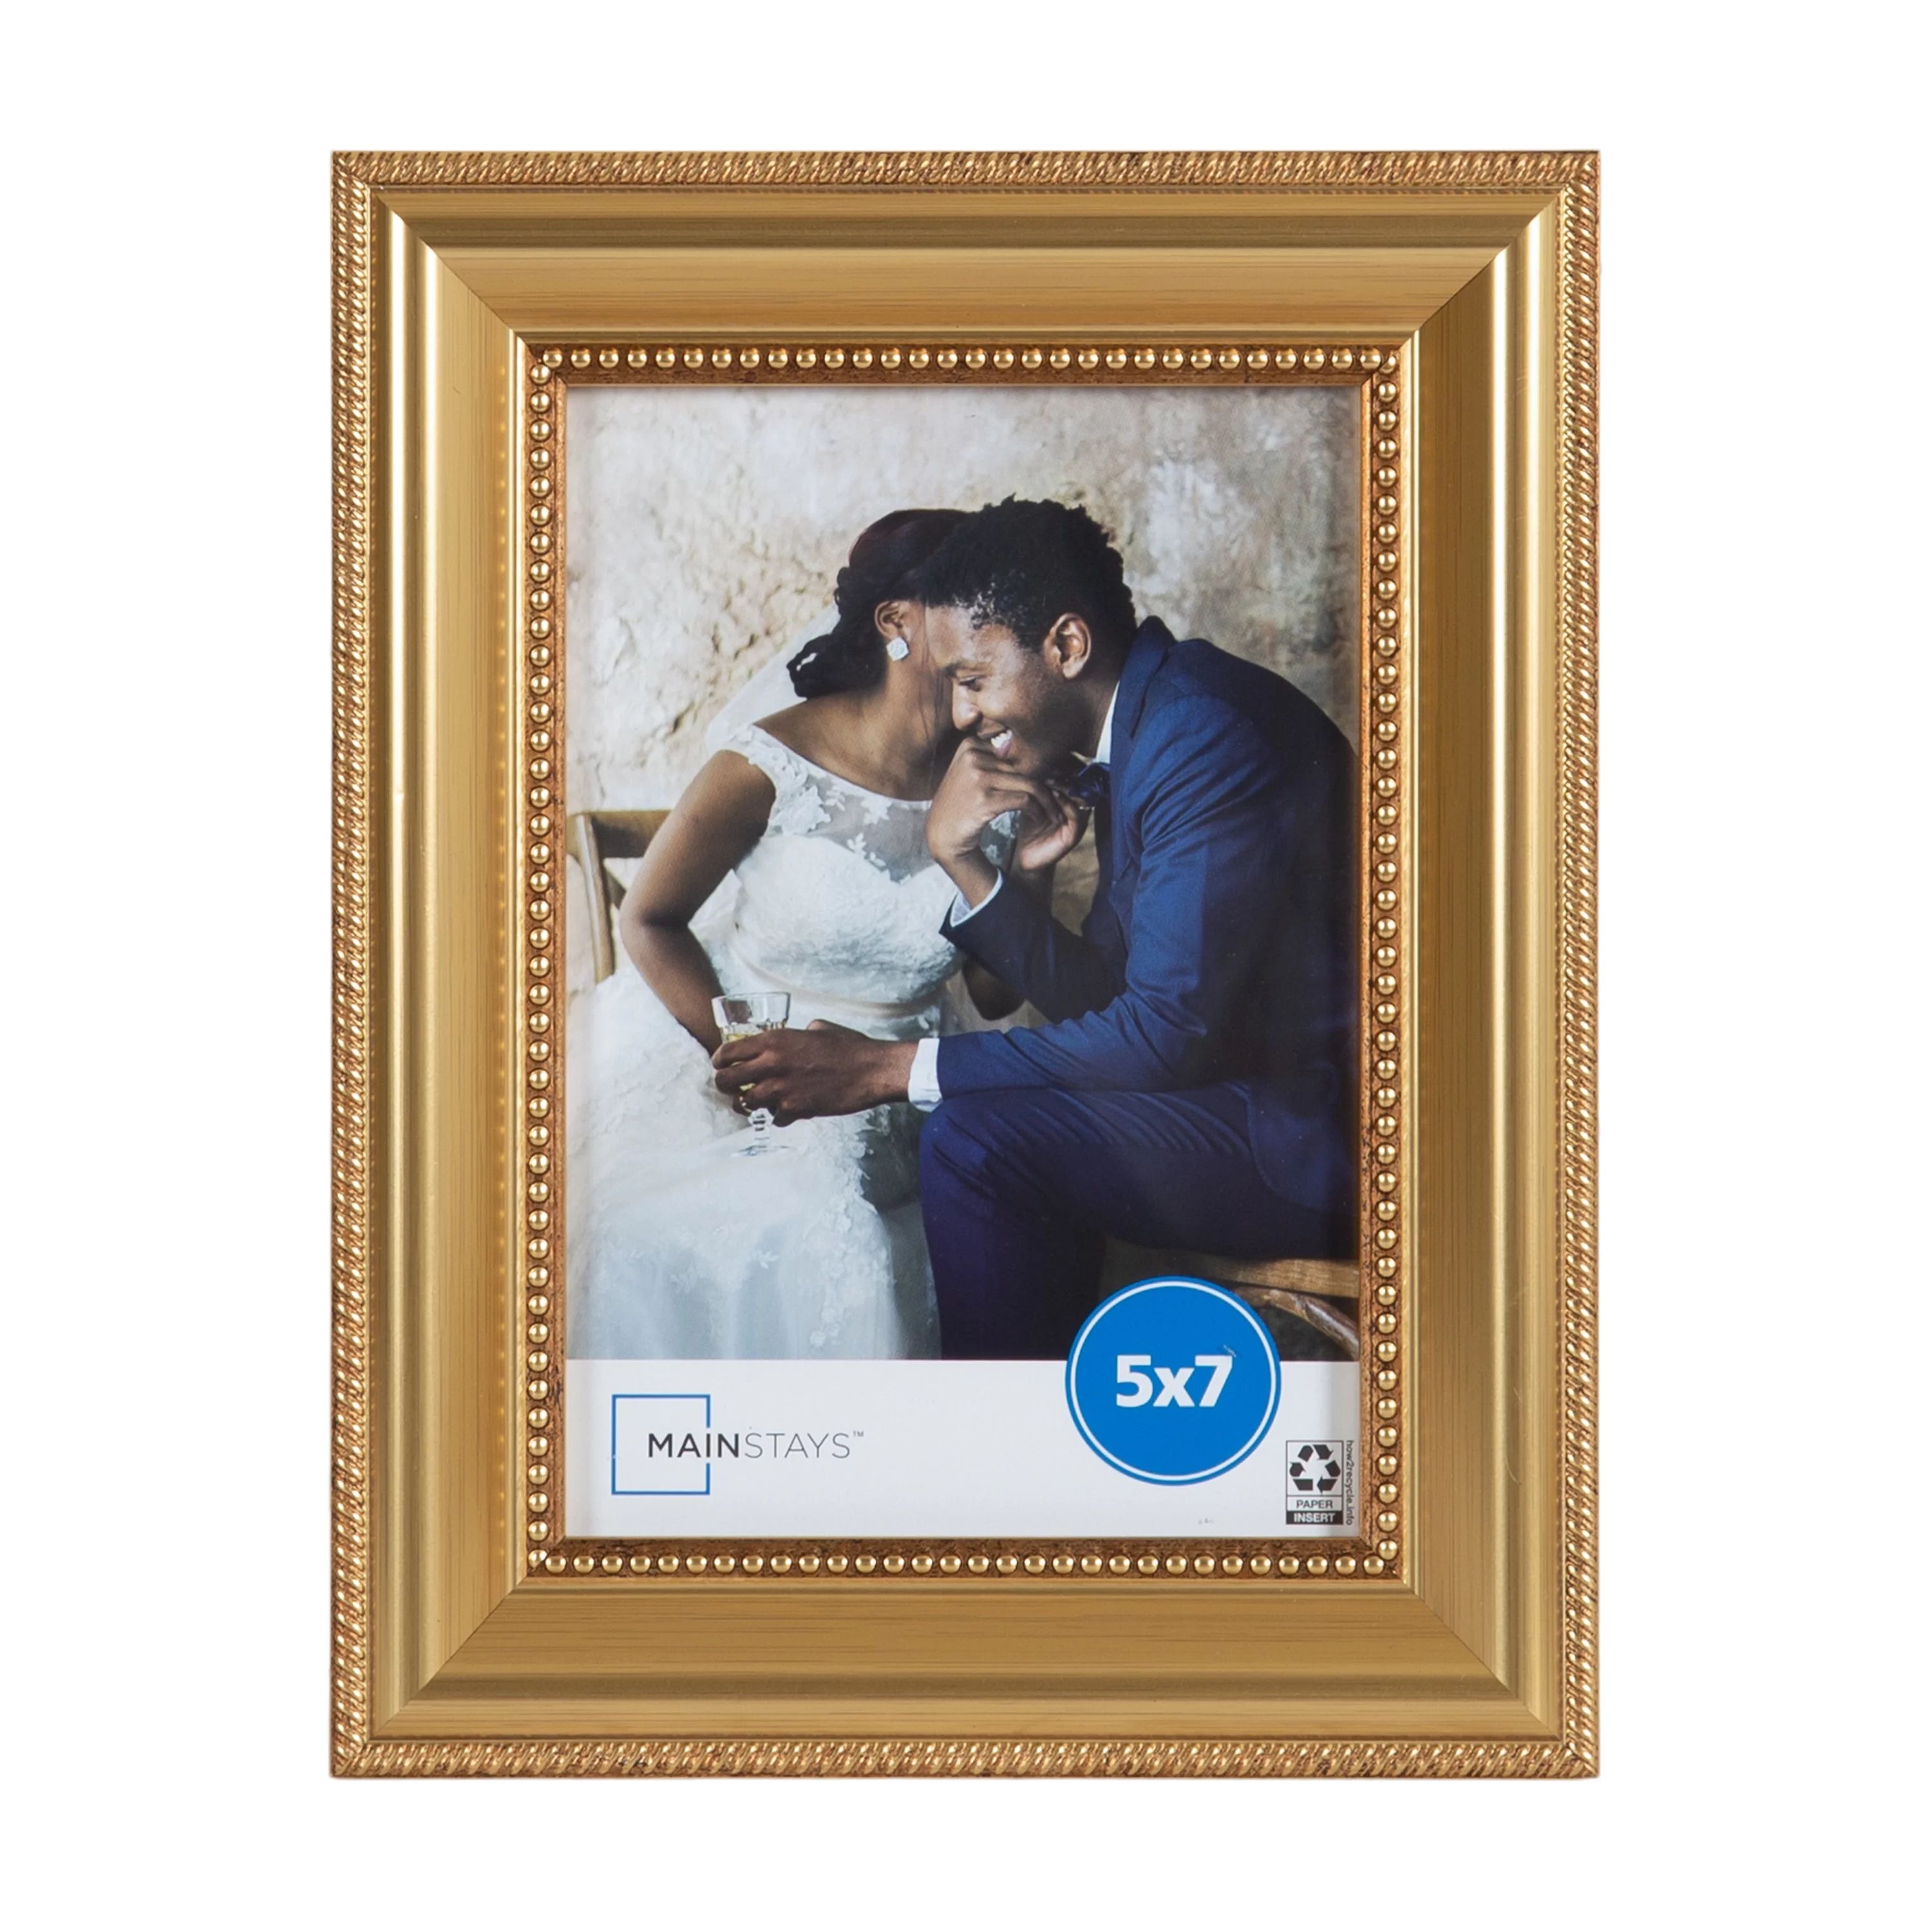 Mainstays 5x7 Yellow Gold Beaded Decorative Tabletop Picture Frame | Walmart (US)